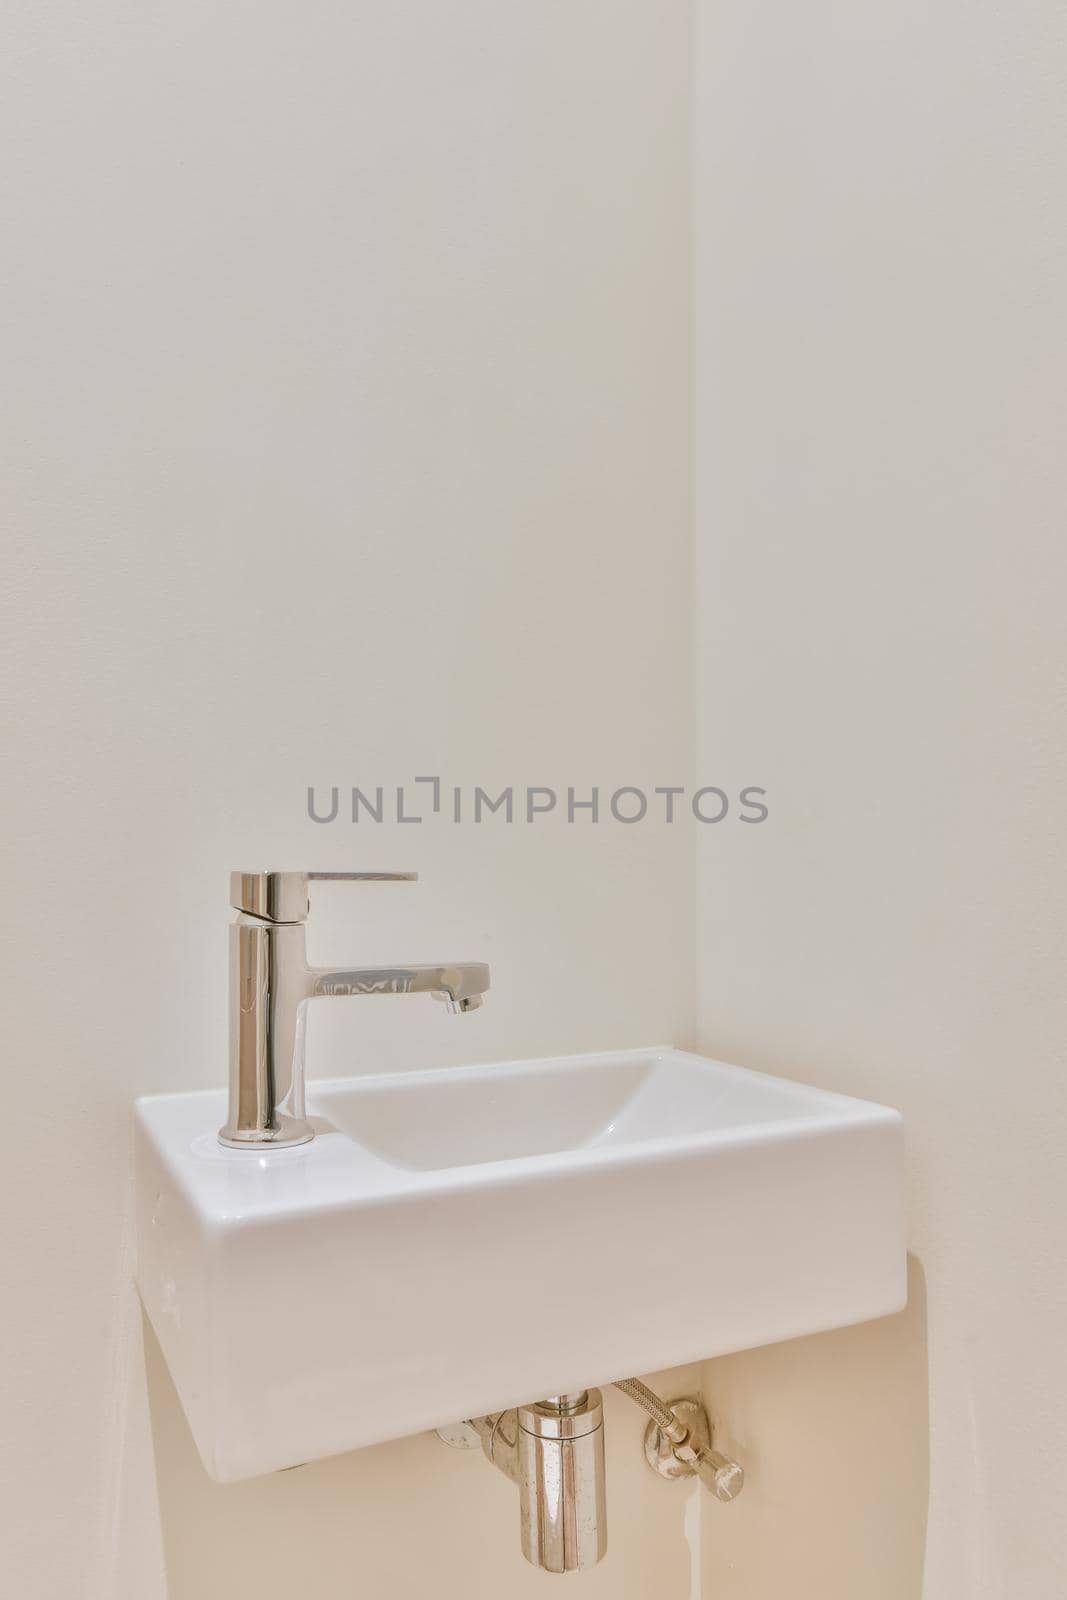 Luxurious washroom with beige tiled floor by casamedia